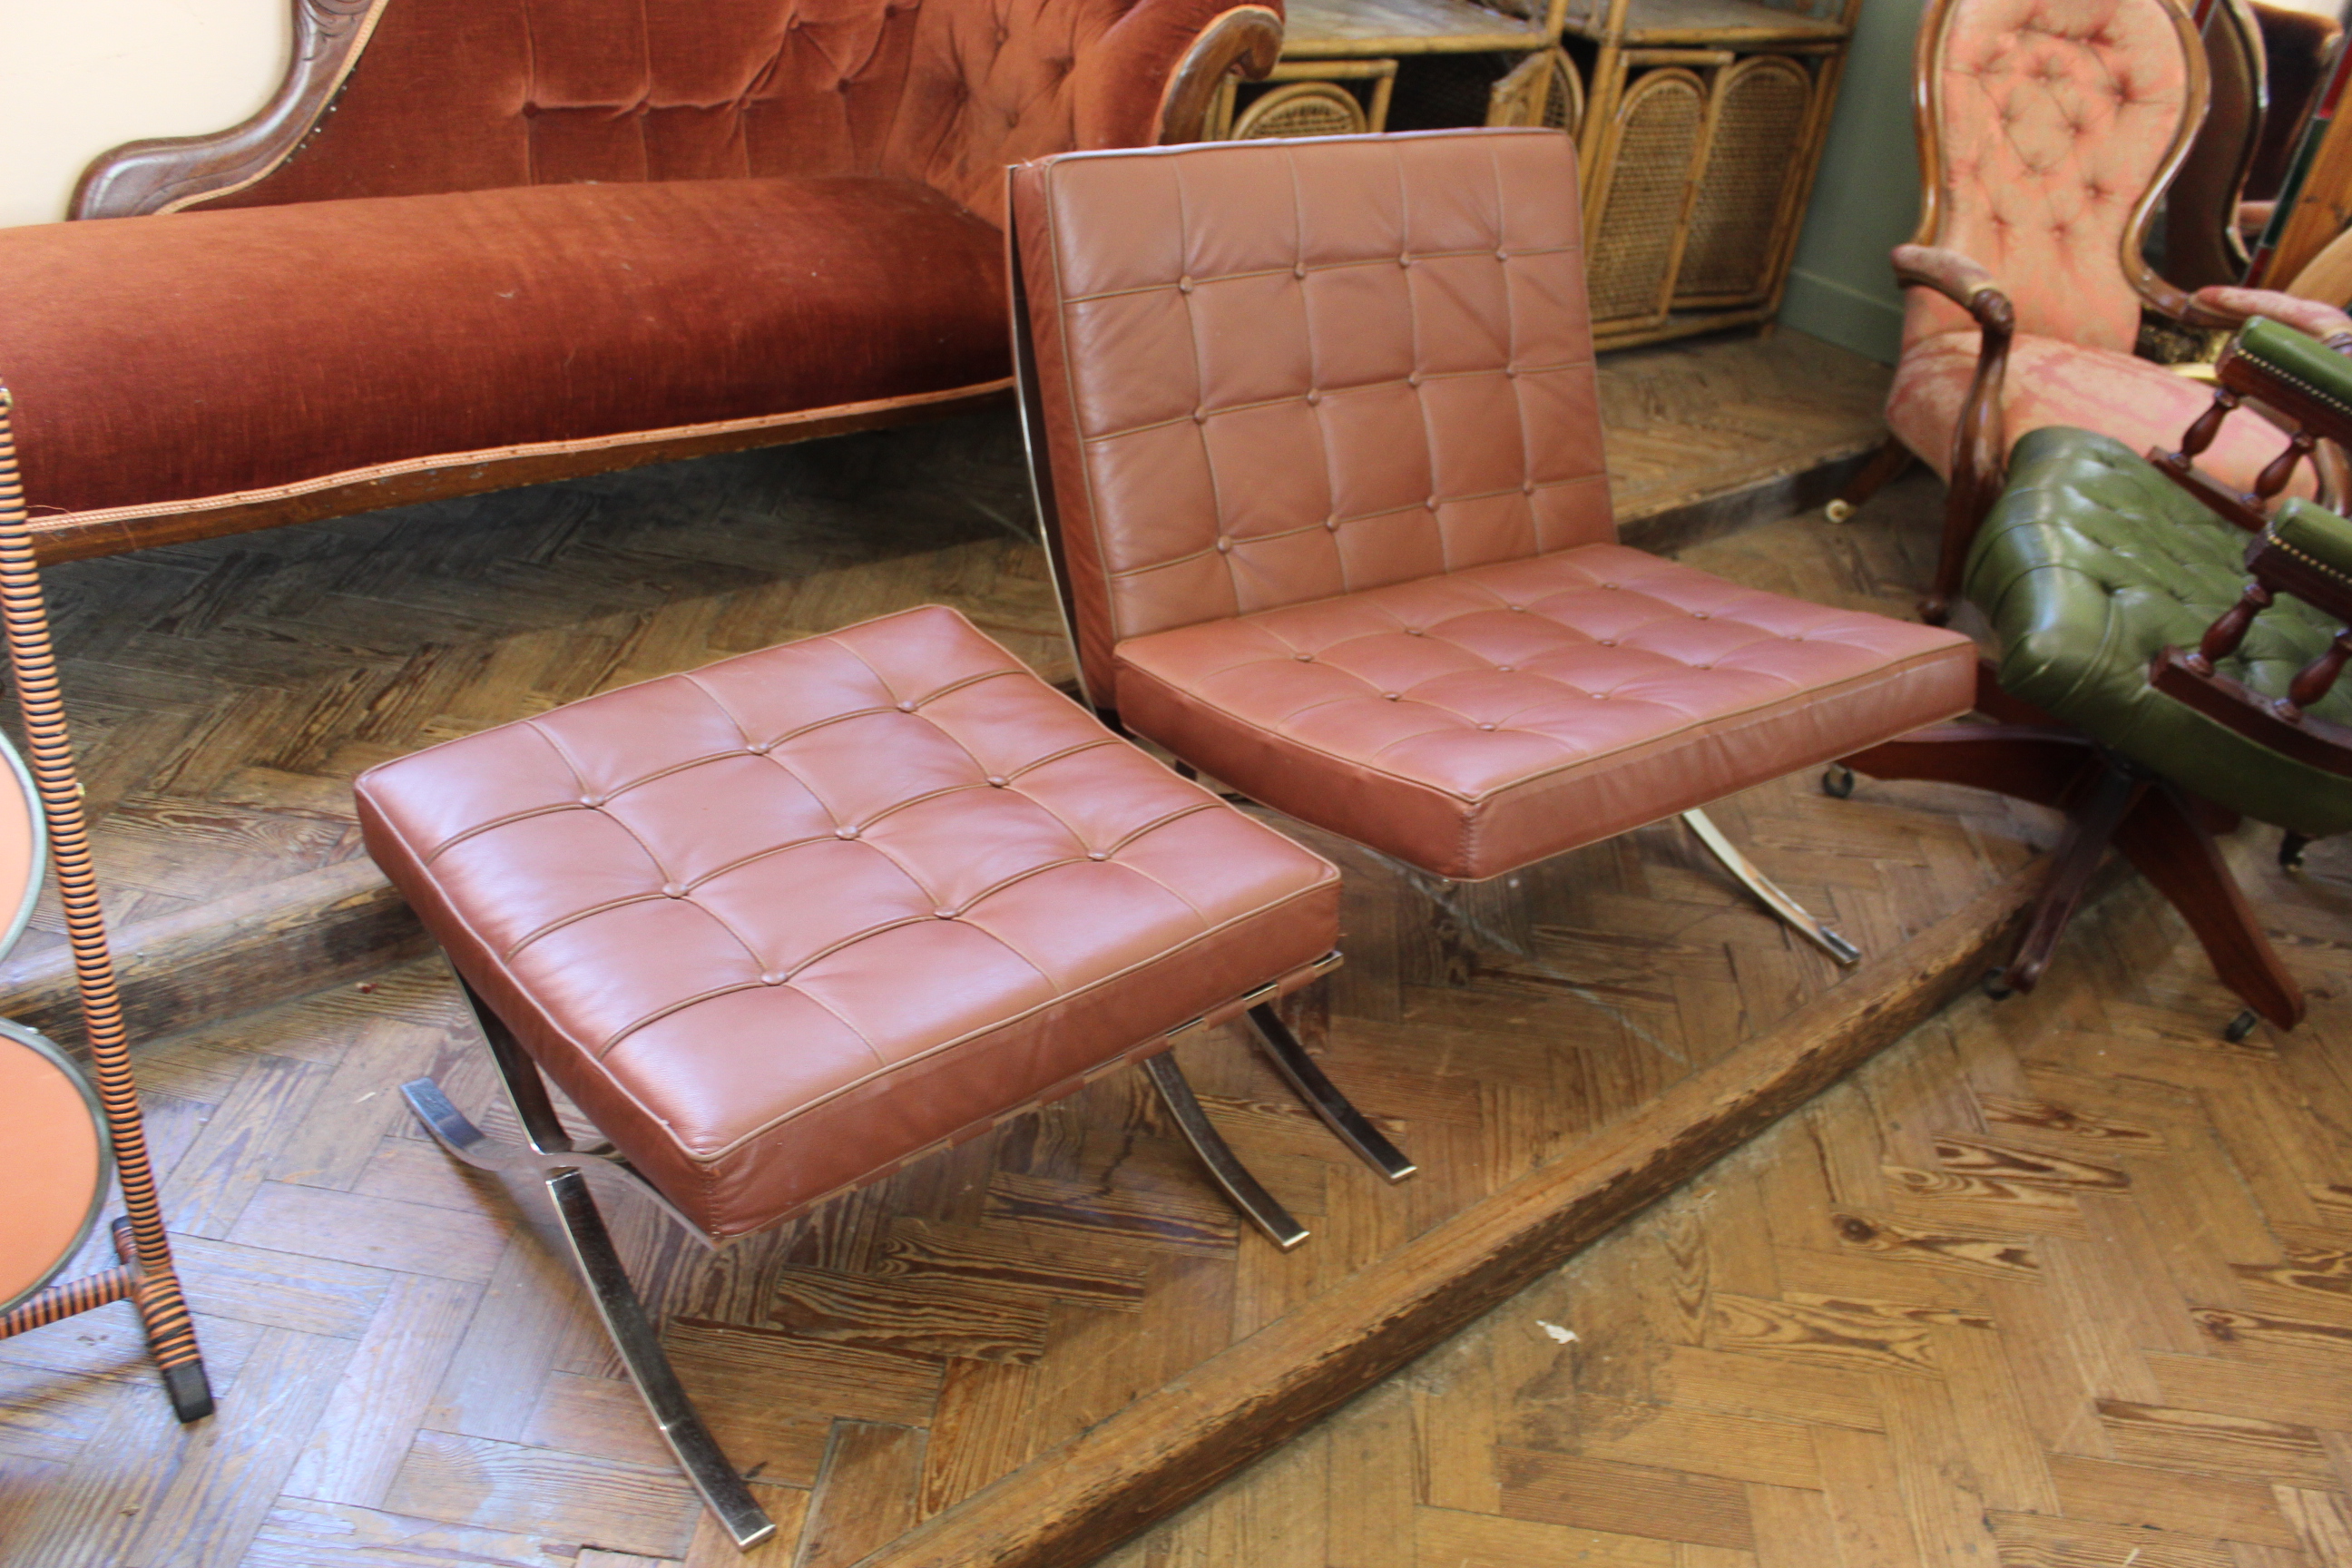 A Barcelona style leather and chrome lounge chair and matching stool